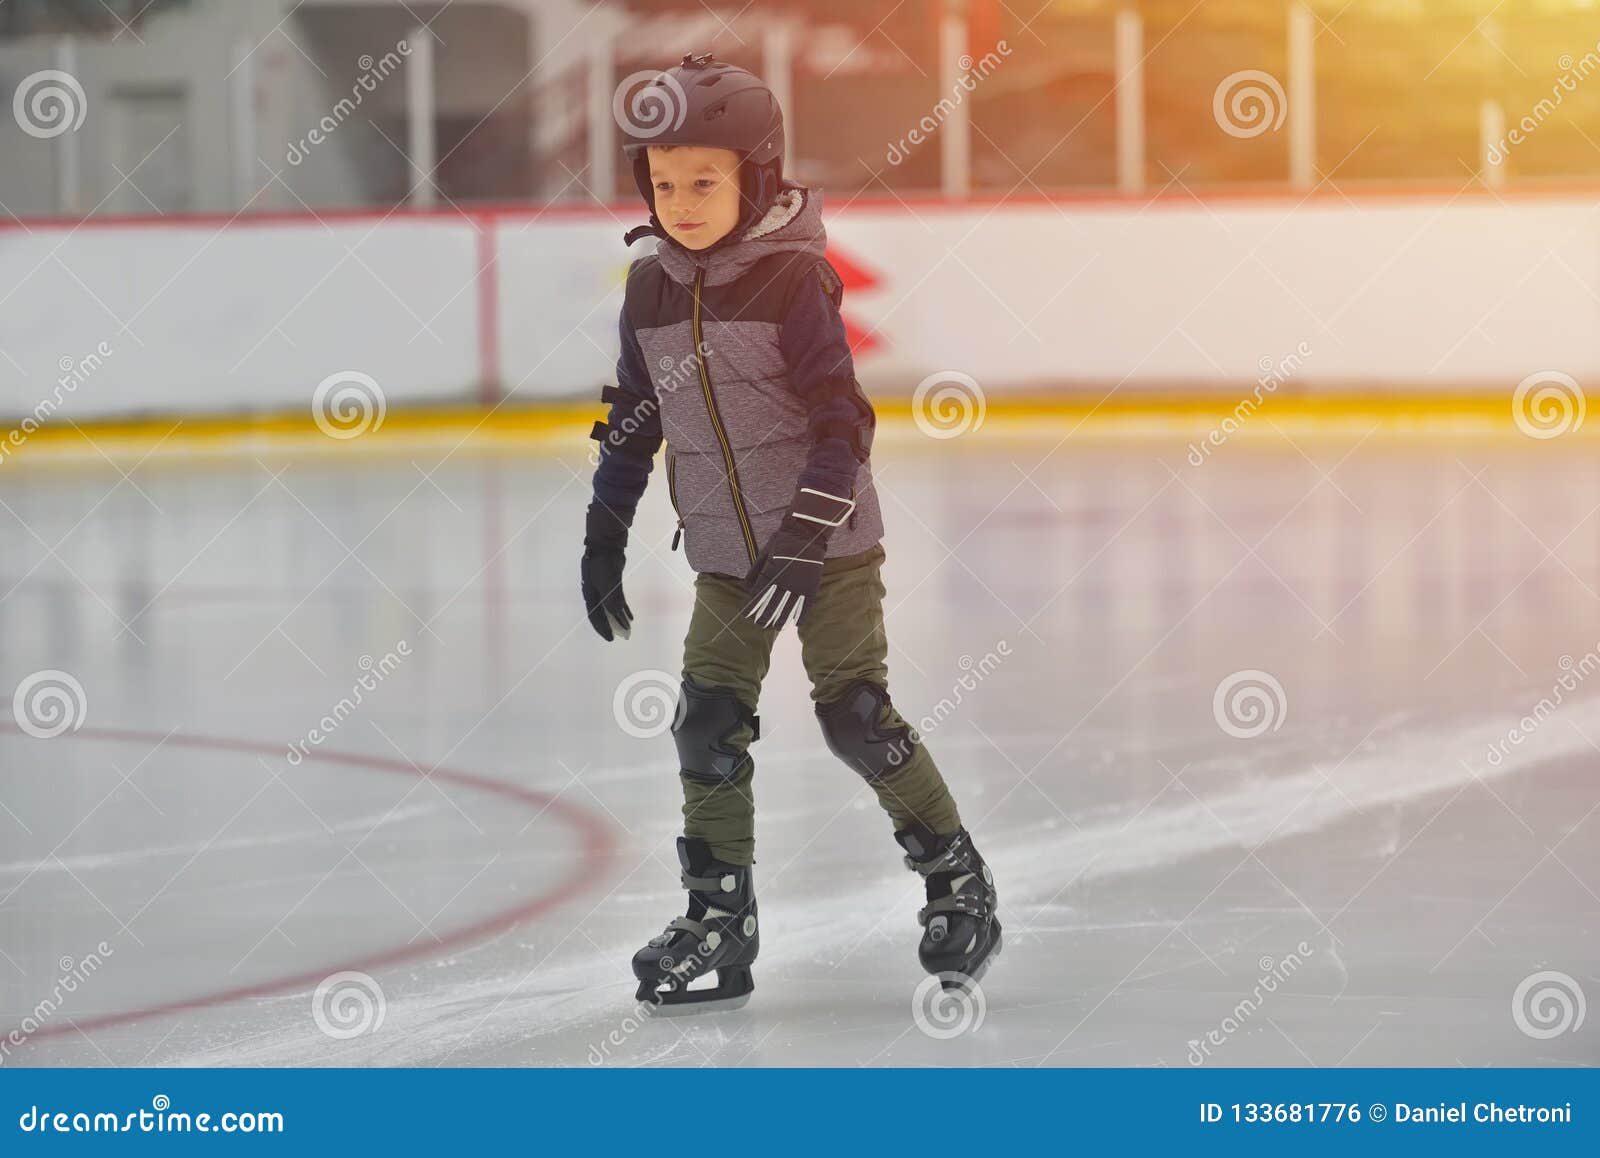 adorable little boy in winter clothes with protections skating o